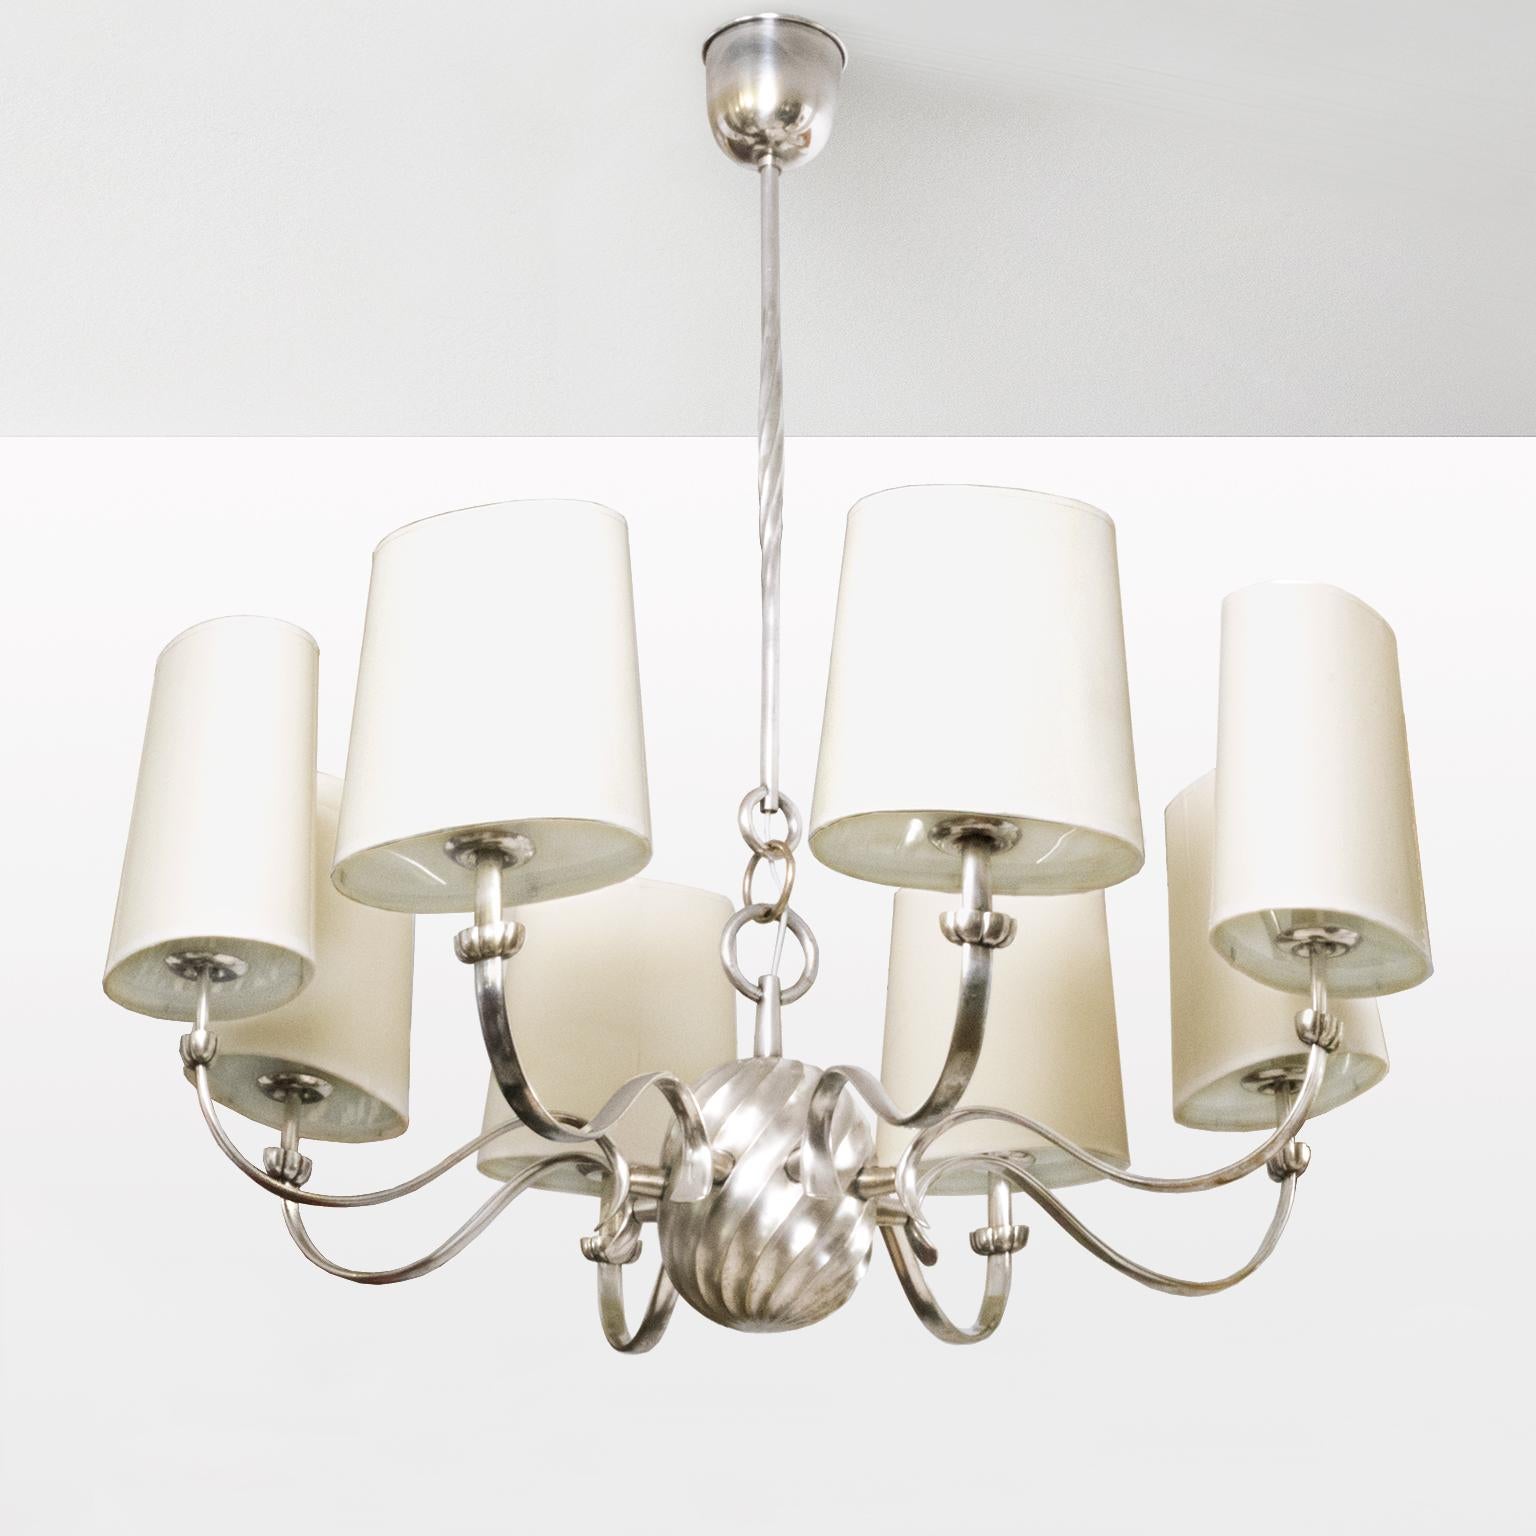 Scandinavian modern eight-arm silver plated bronze chandelier with twisted centre sphere and curved ribbon form arms. Newly restored, polished and lacquered with new wiring ready for use in the USA. Each arm has a standard base socket, a newly